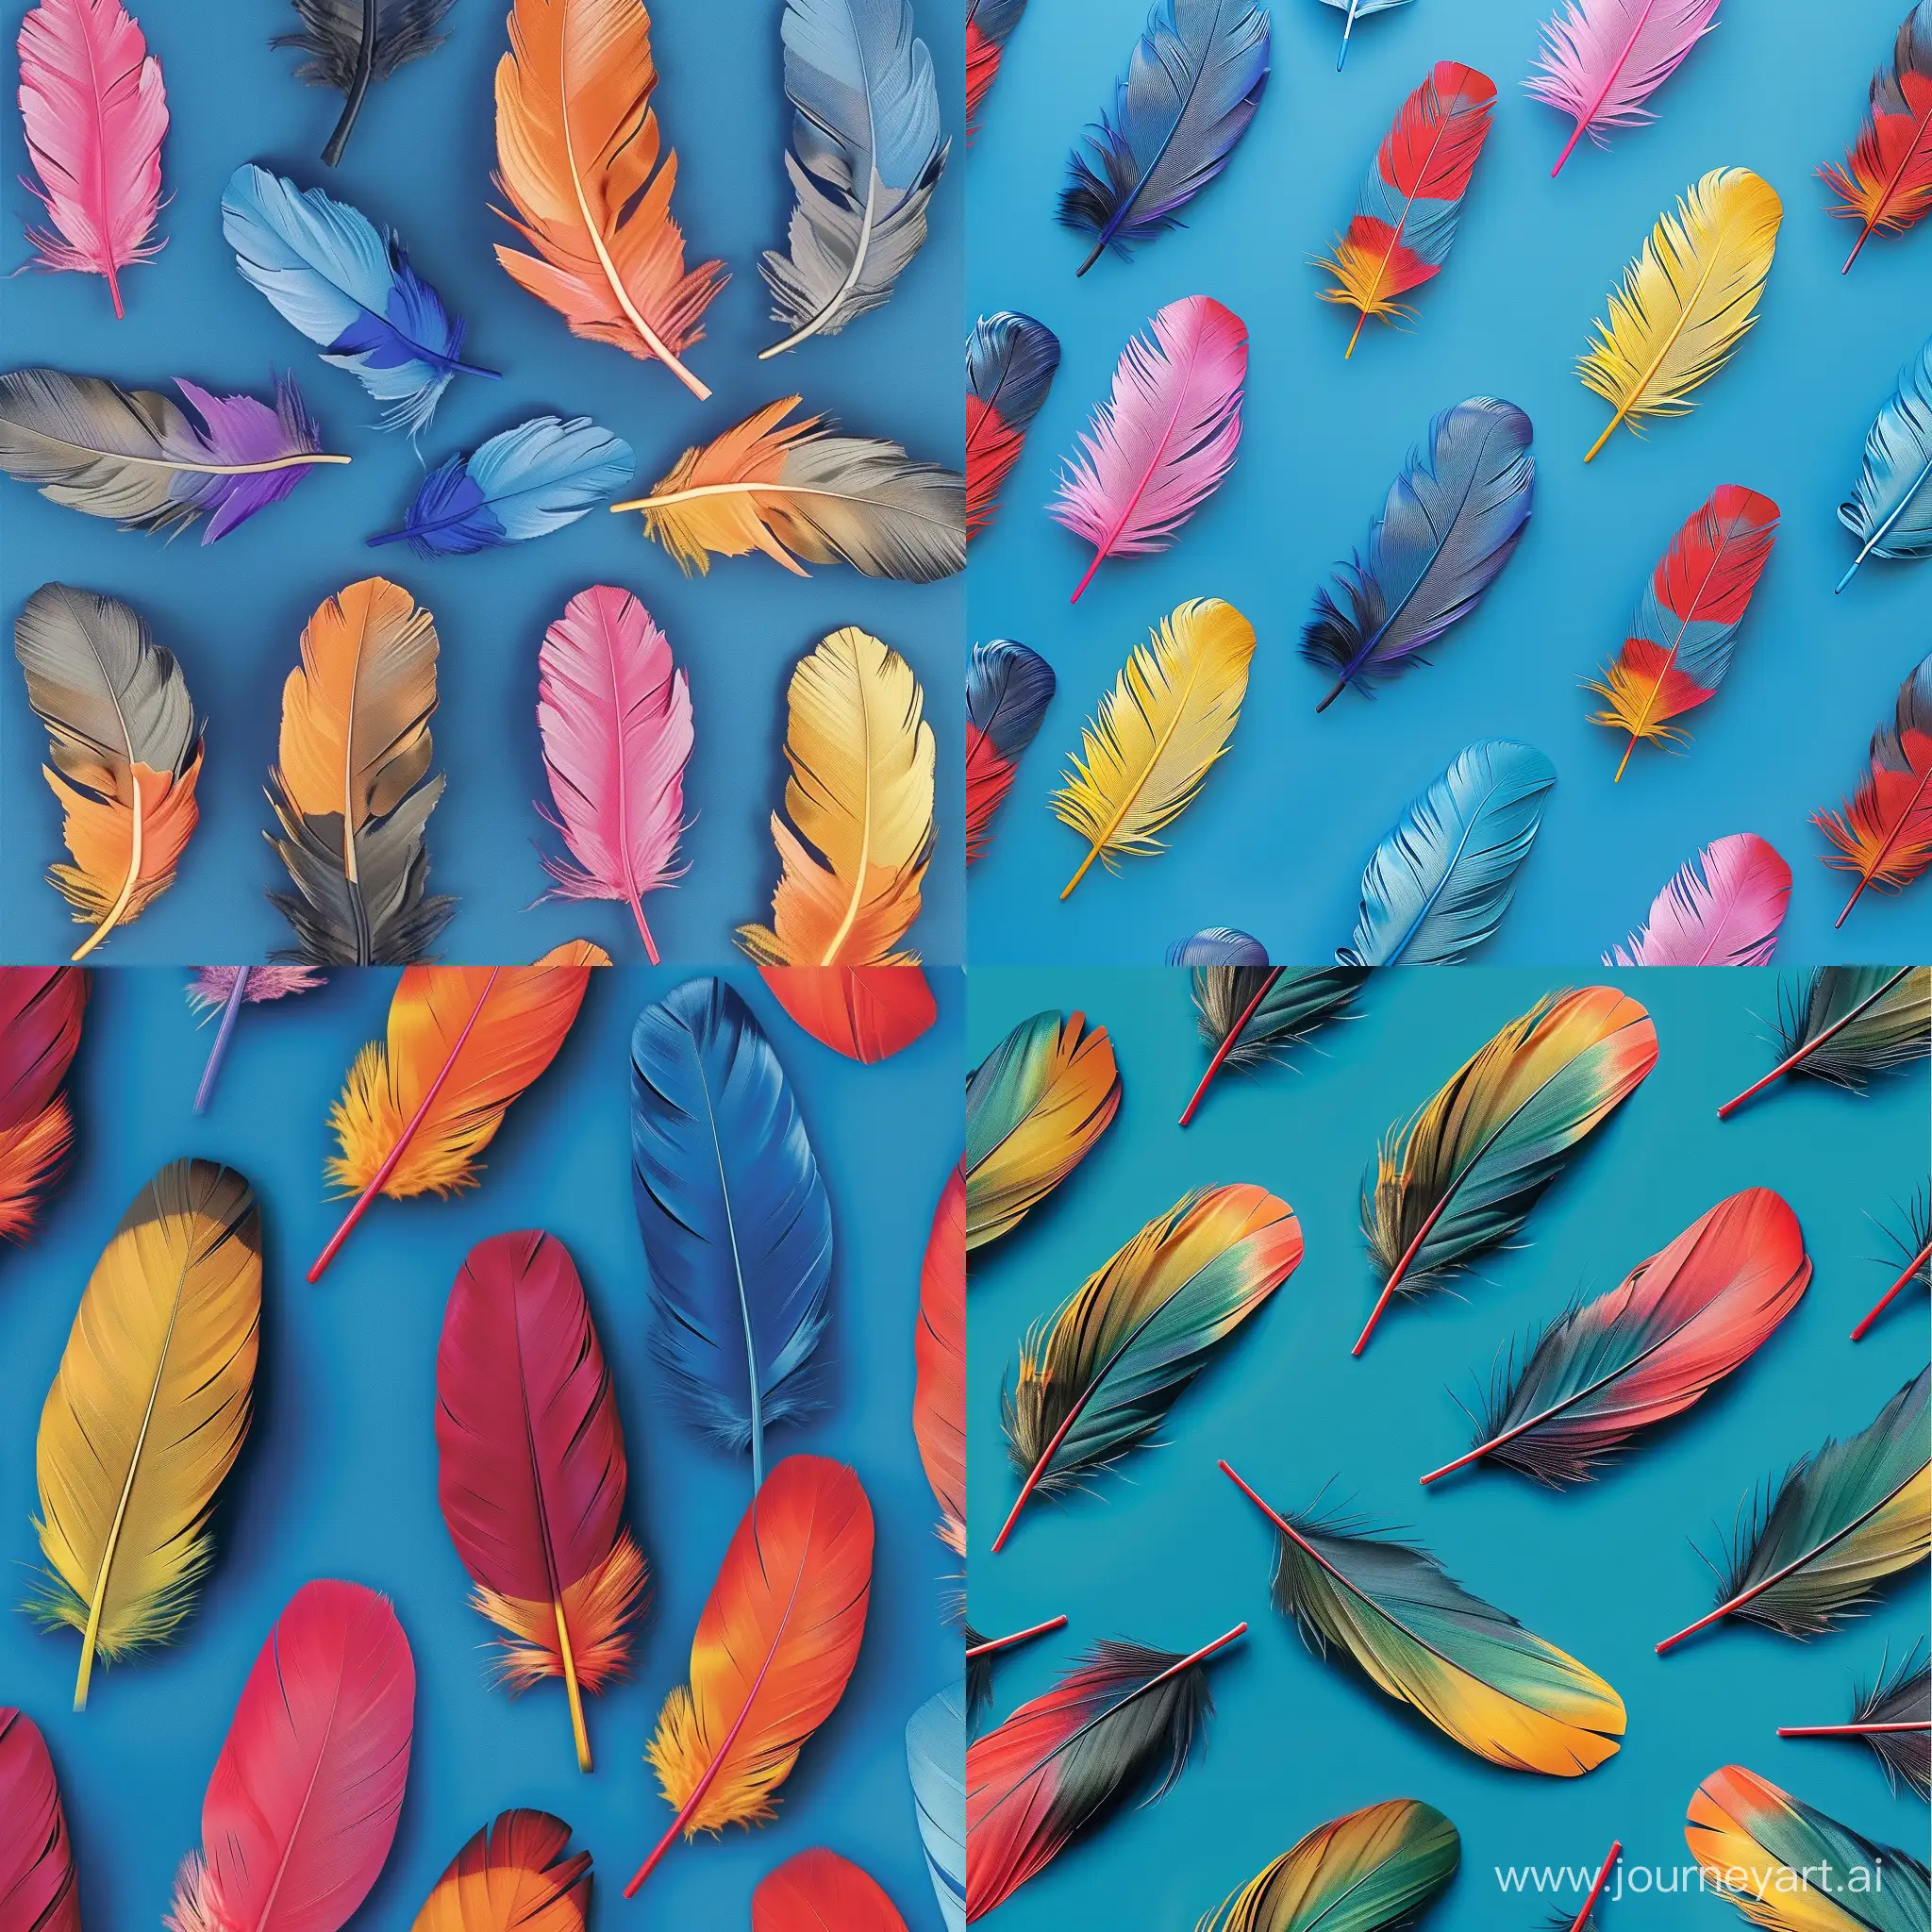 a pattern of photorealistic multicolored feathers on a blue background